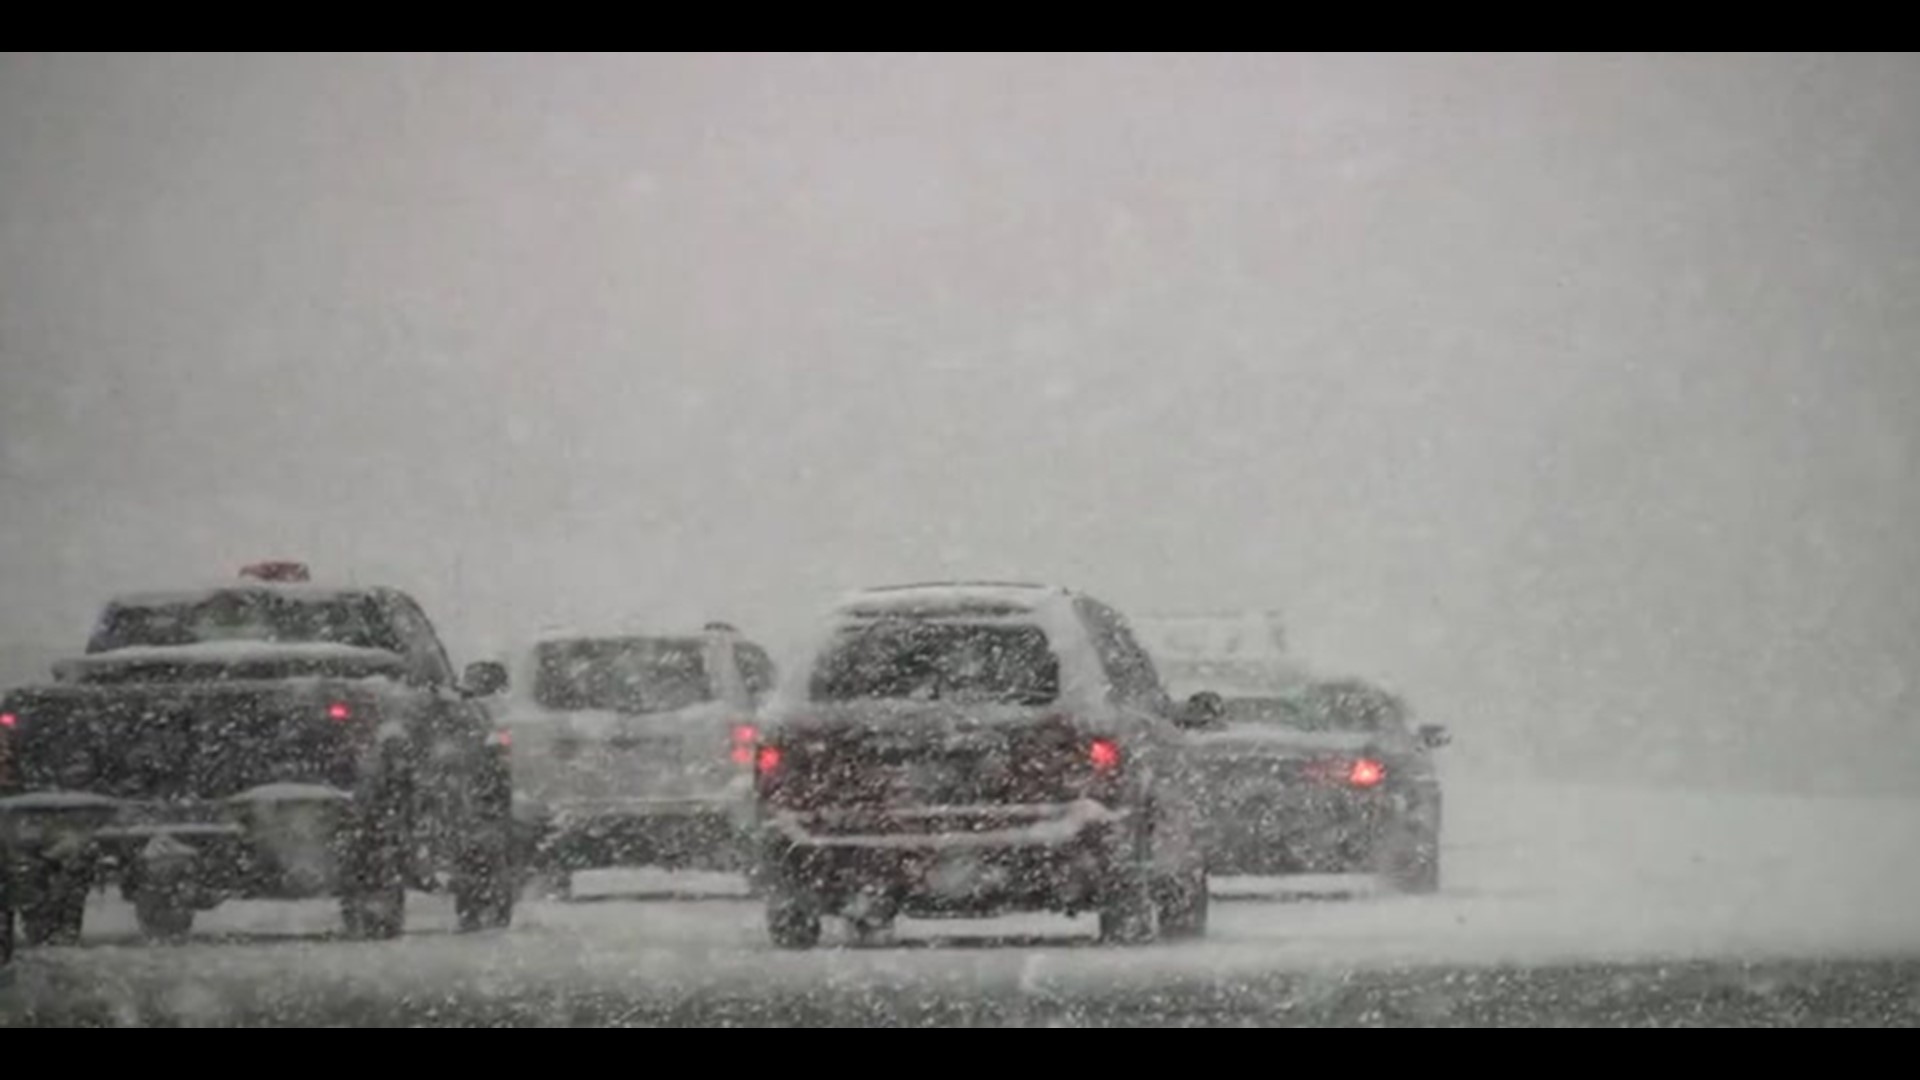 While it's best to stay off the road, if you have to drive in snow, you need to know what to do to stay safe.